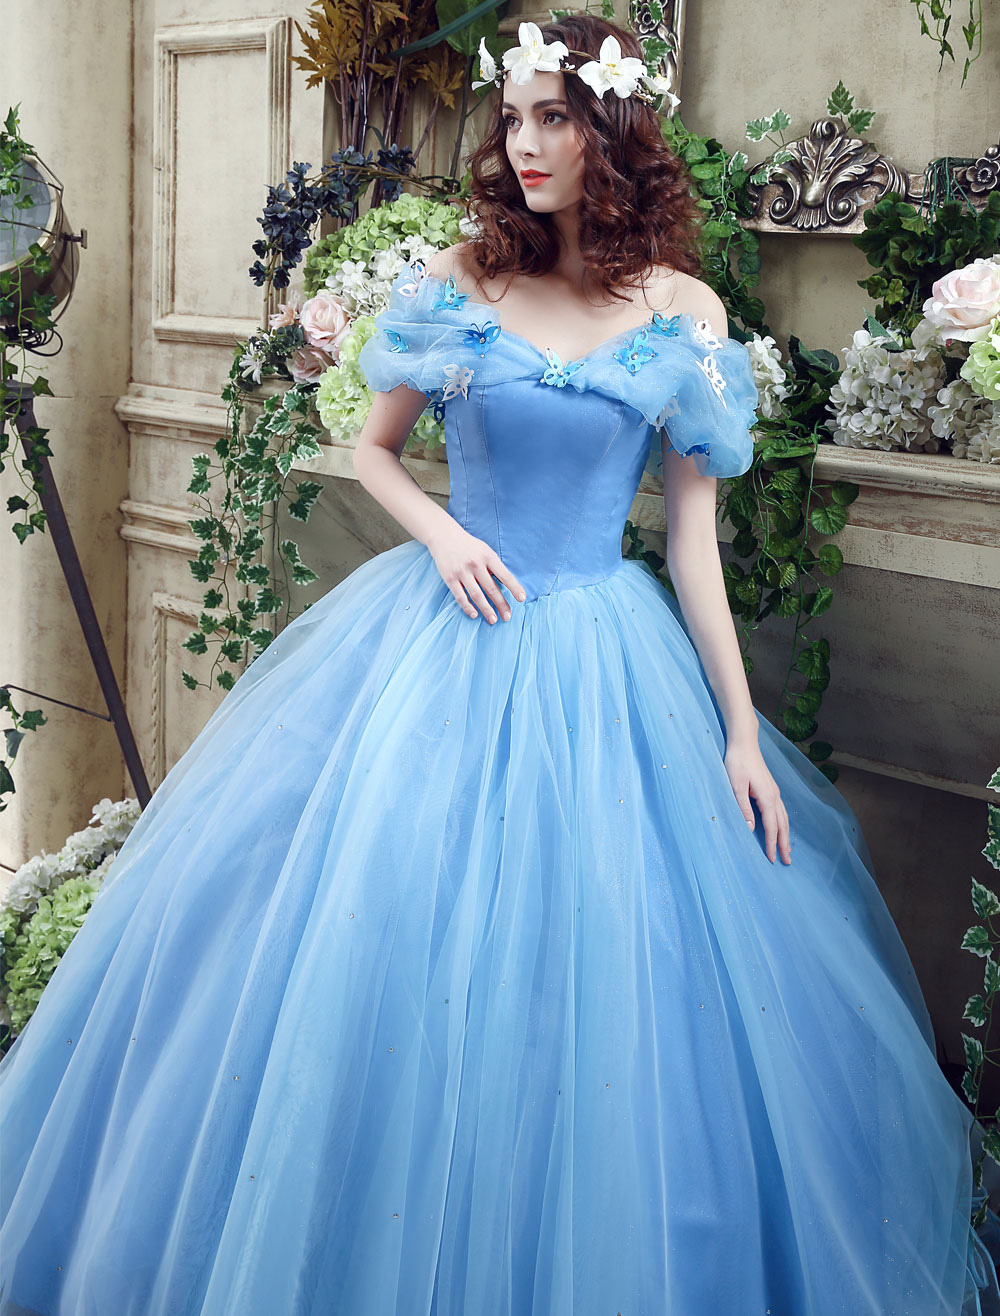 Cinderella Dress Blue Organza Tulle Off the Shoulder Ball Gown Dress ...